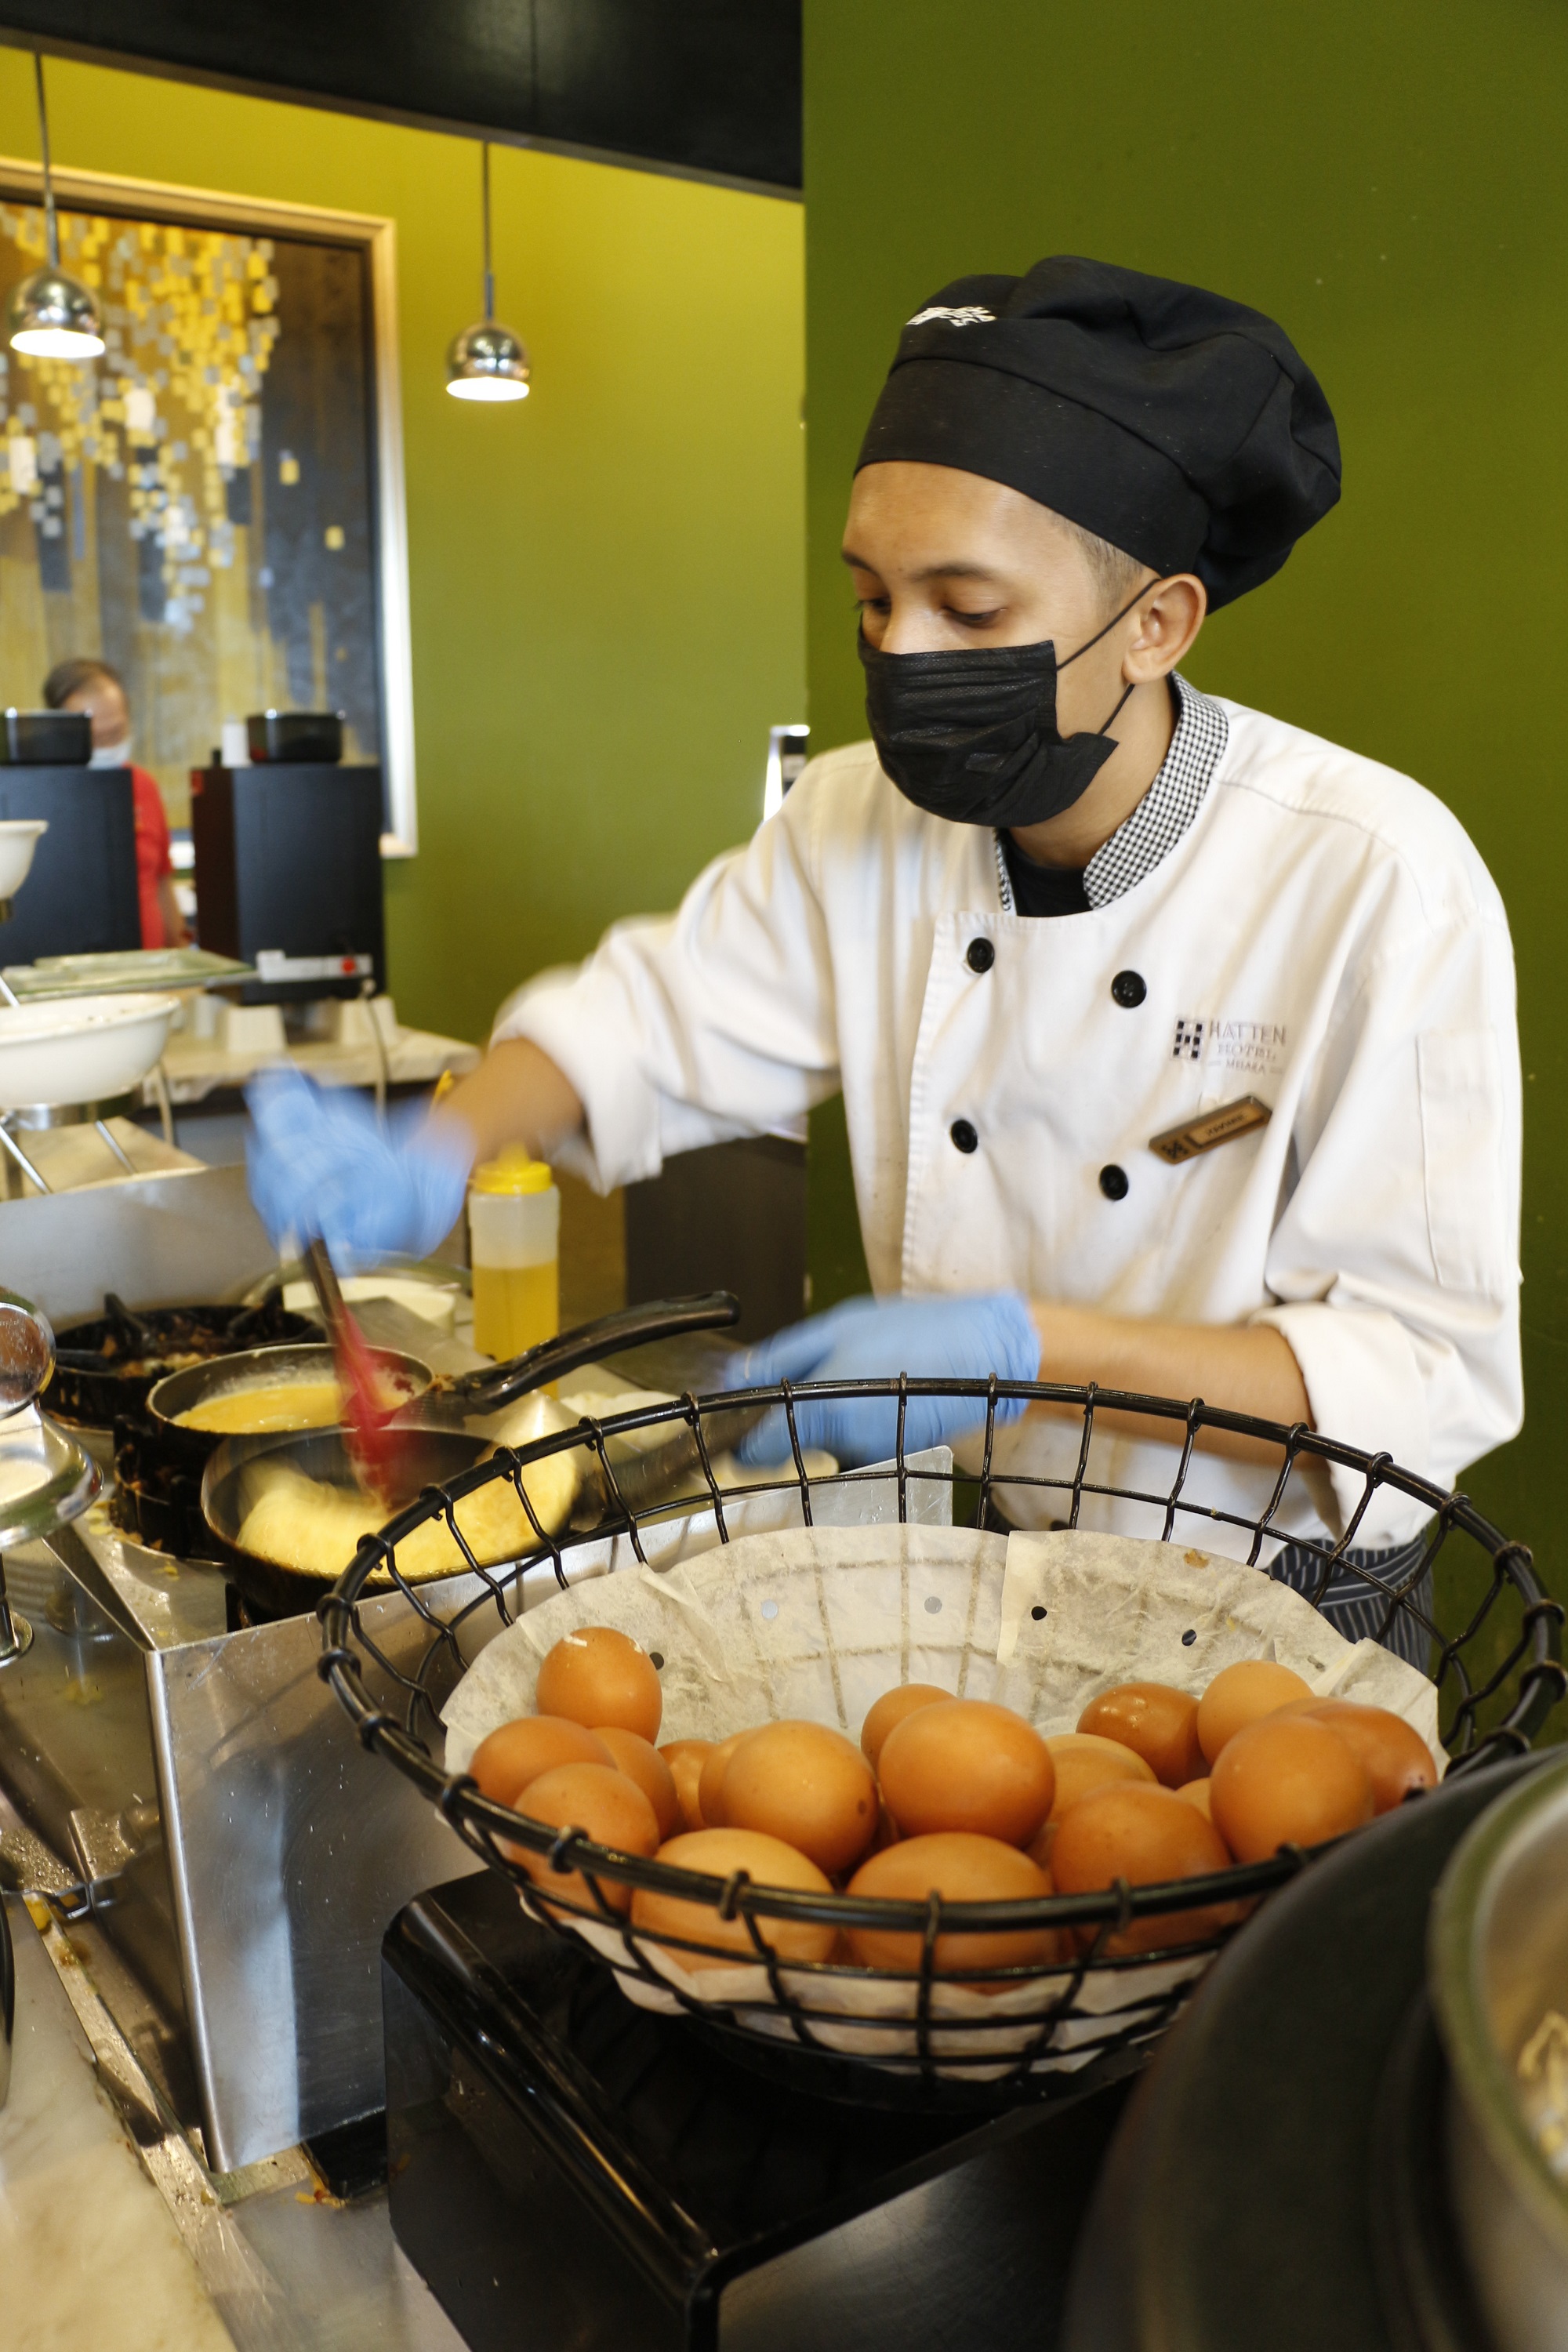 Hatten Hotels Worldwide shifts to use only cage-free eggs by 2025